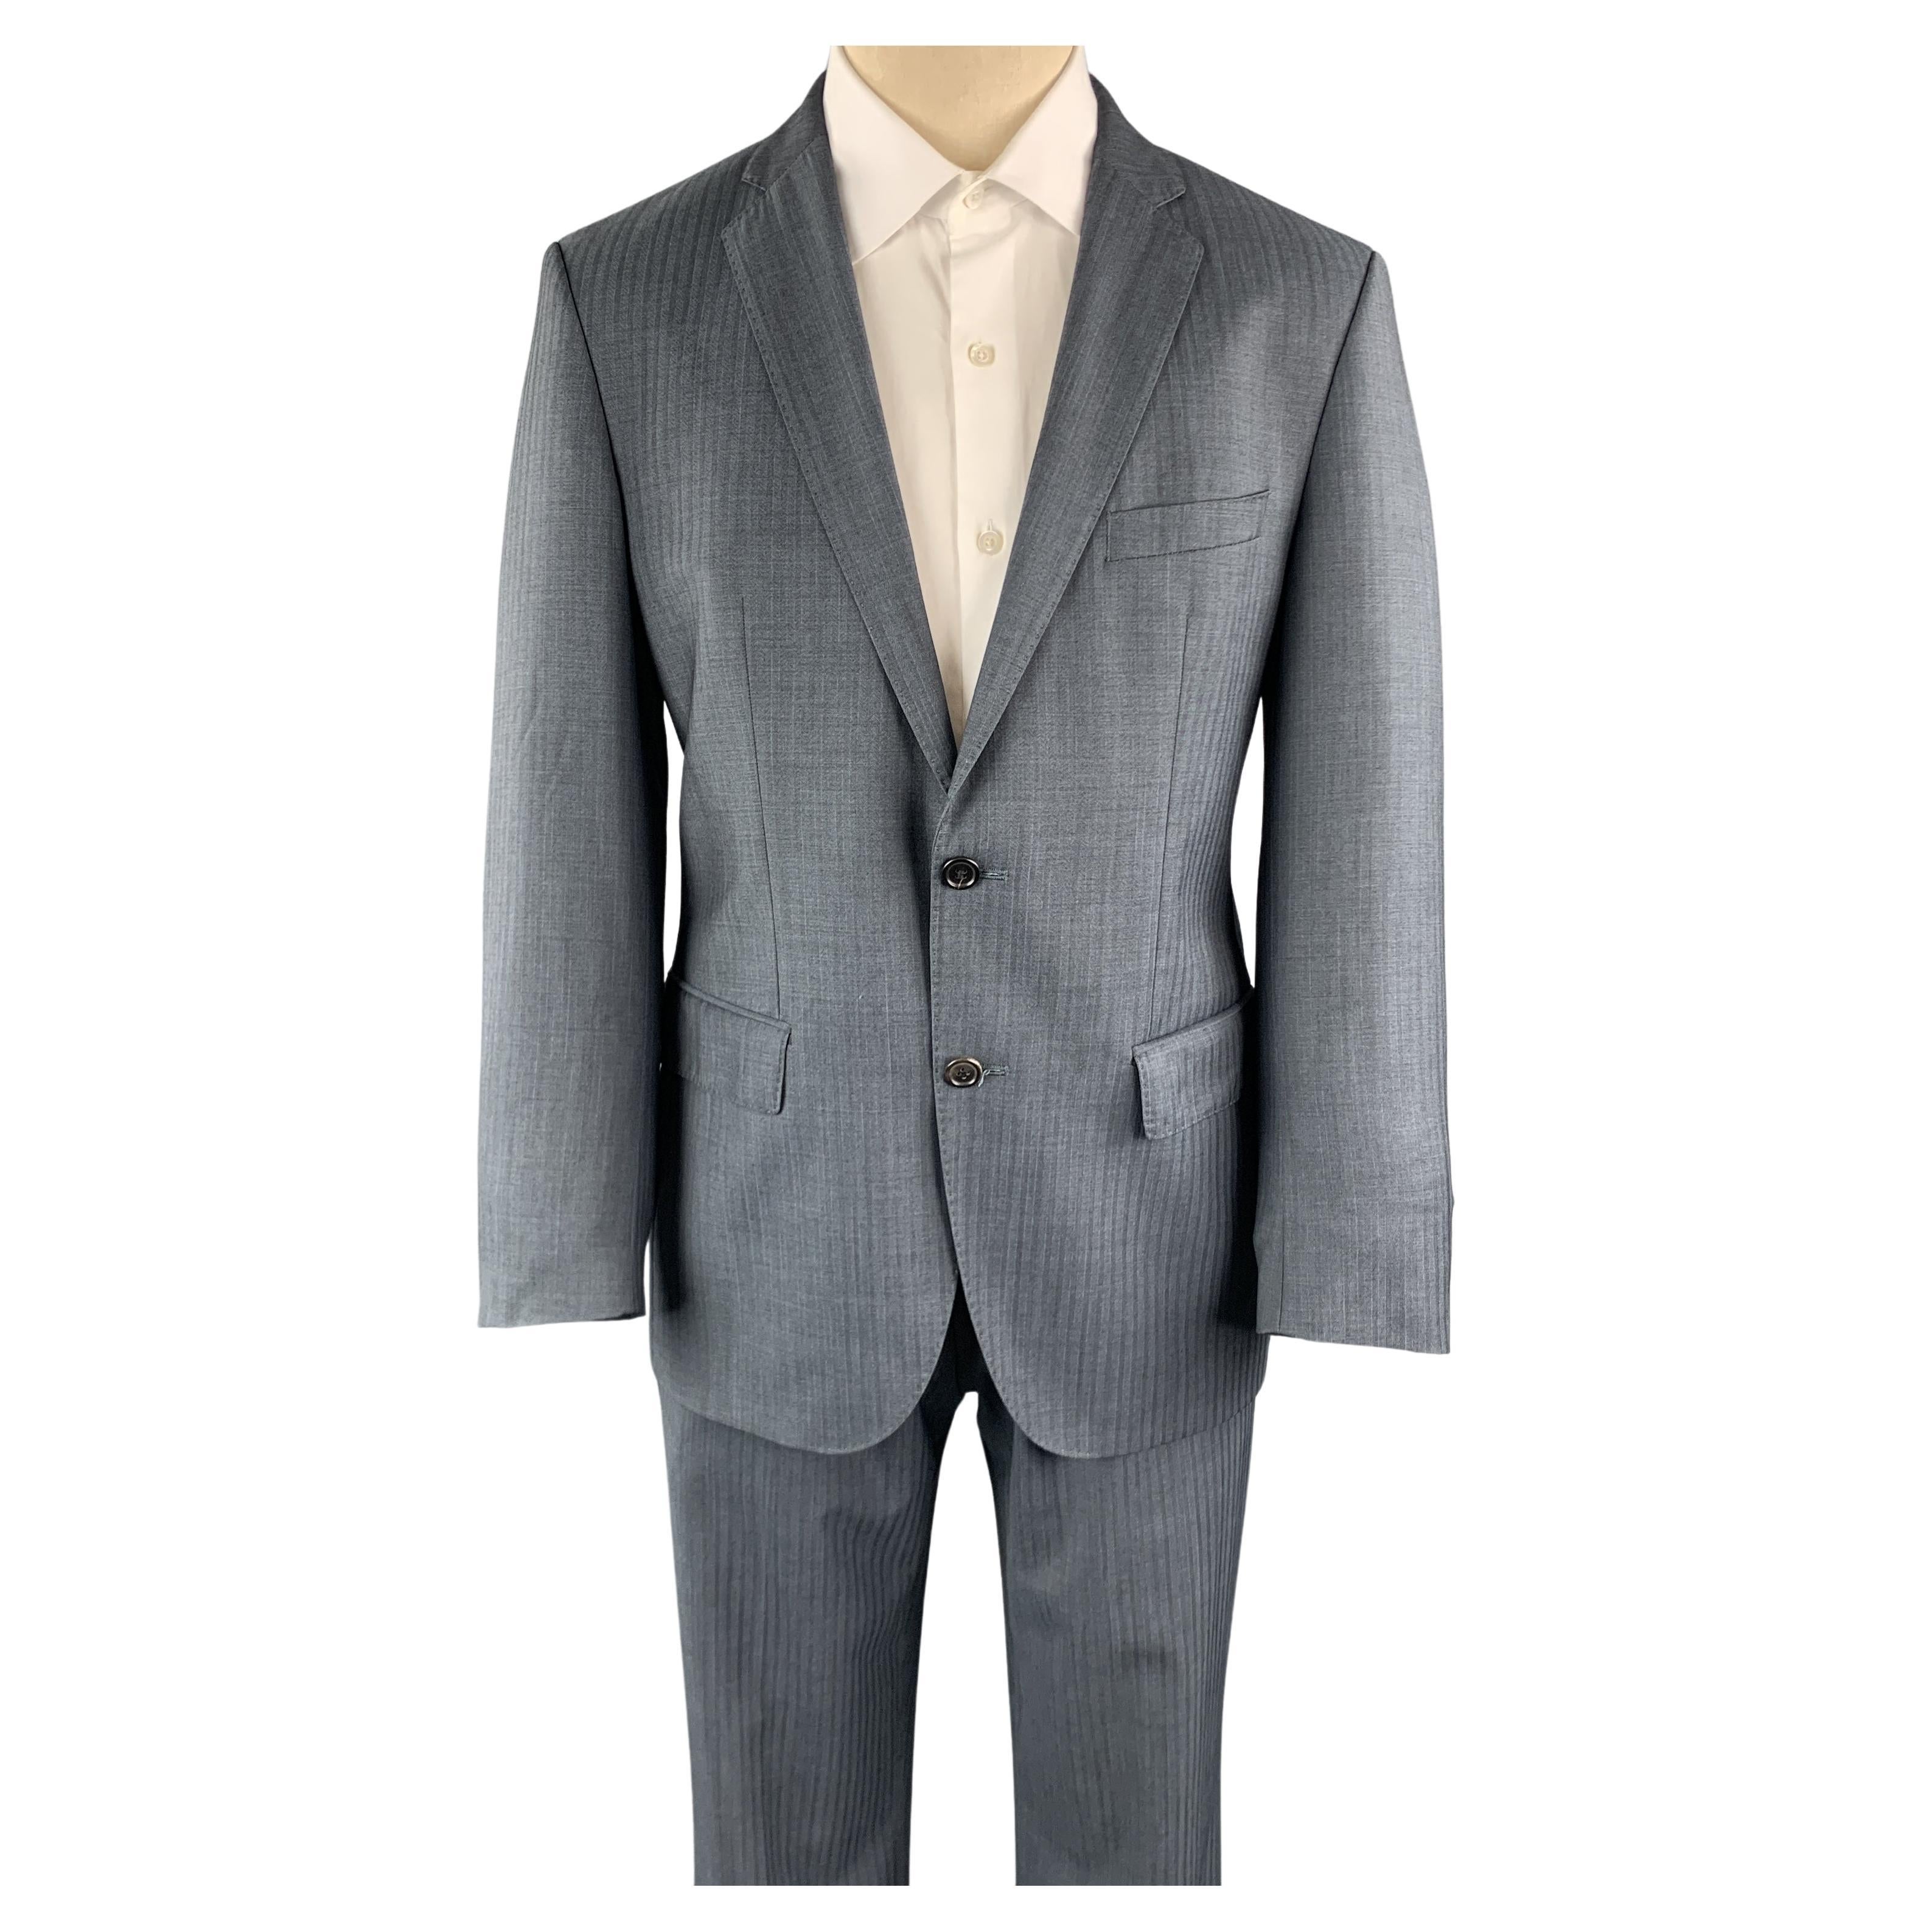 Hugo Boss Suits, Outfits and Ensembles